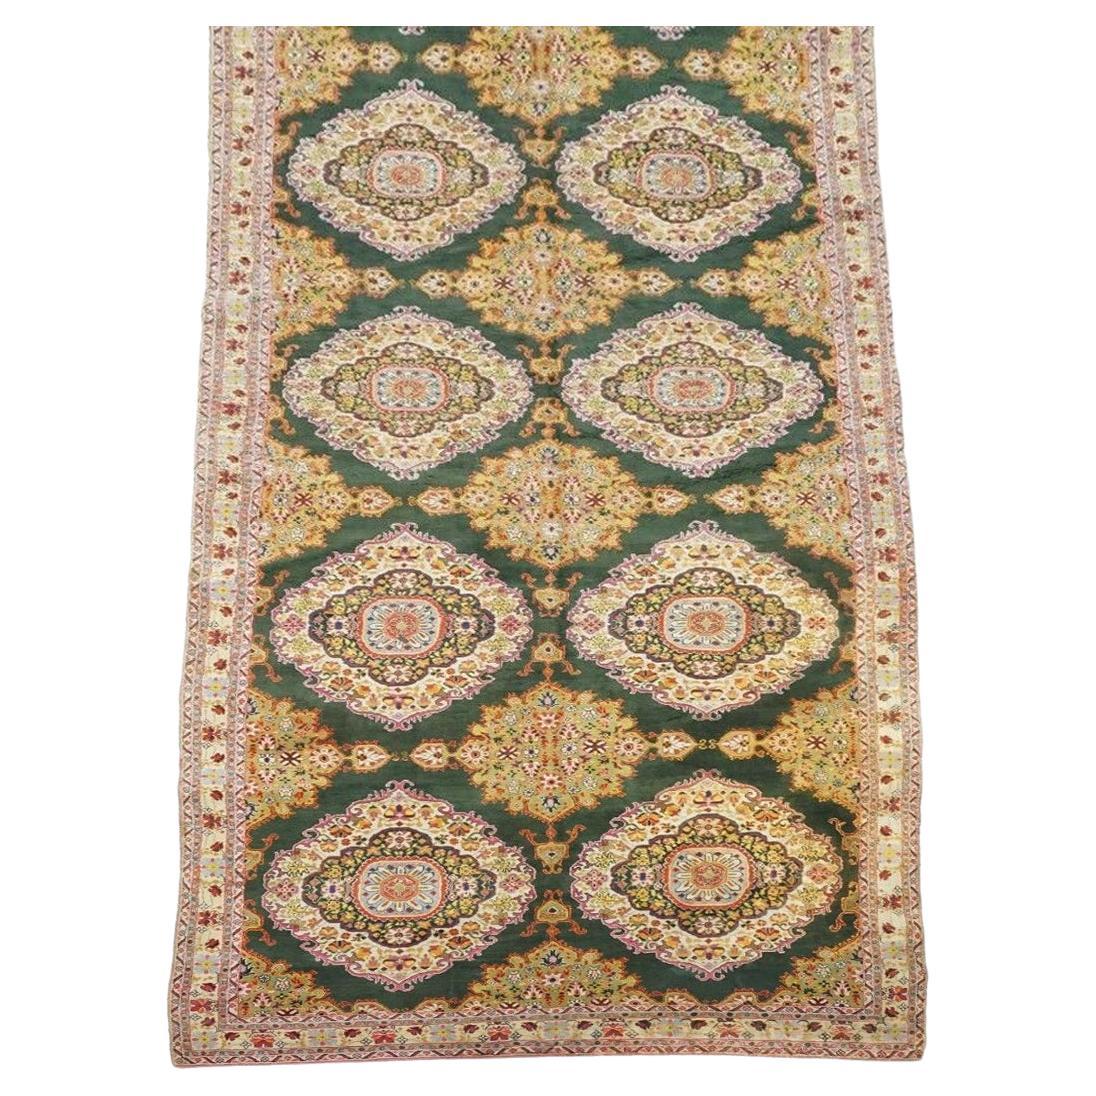 Antique Indian Cotton Agra Gallery Runner